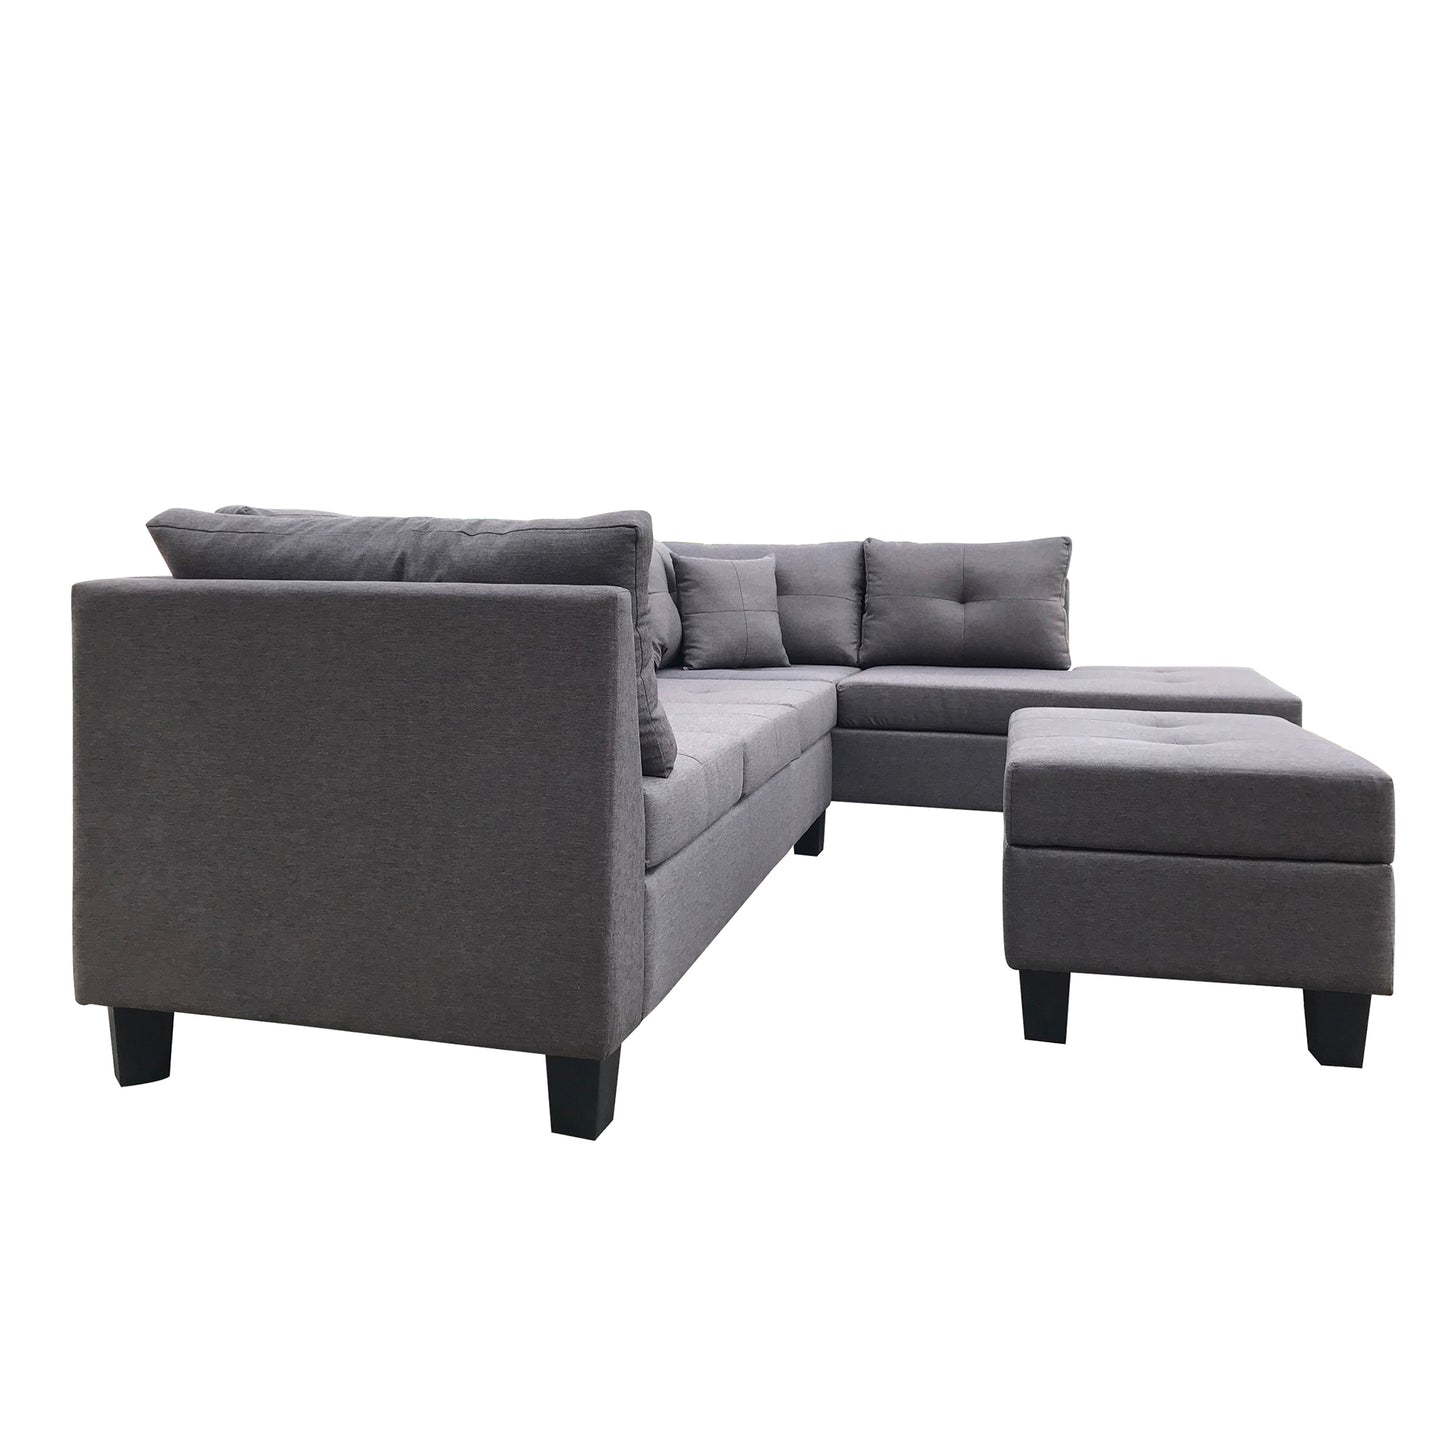 Sectional Sofa Set     with  Right Hand Chaise Lounge and  Ottoman  (Dark Grey)